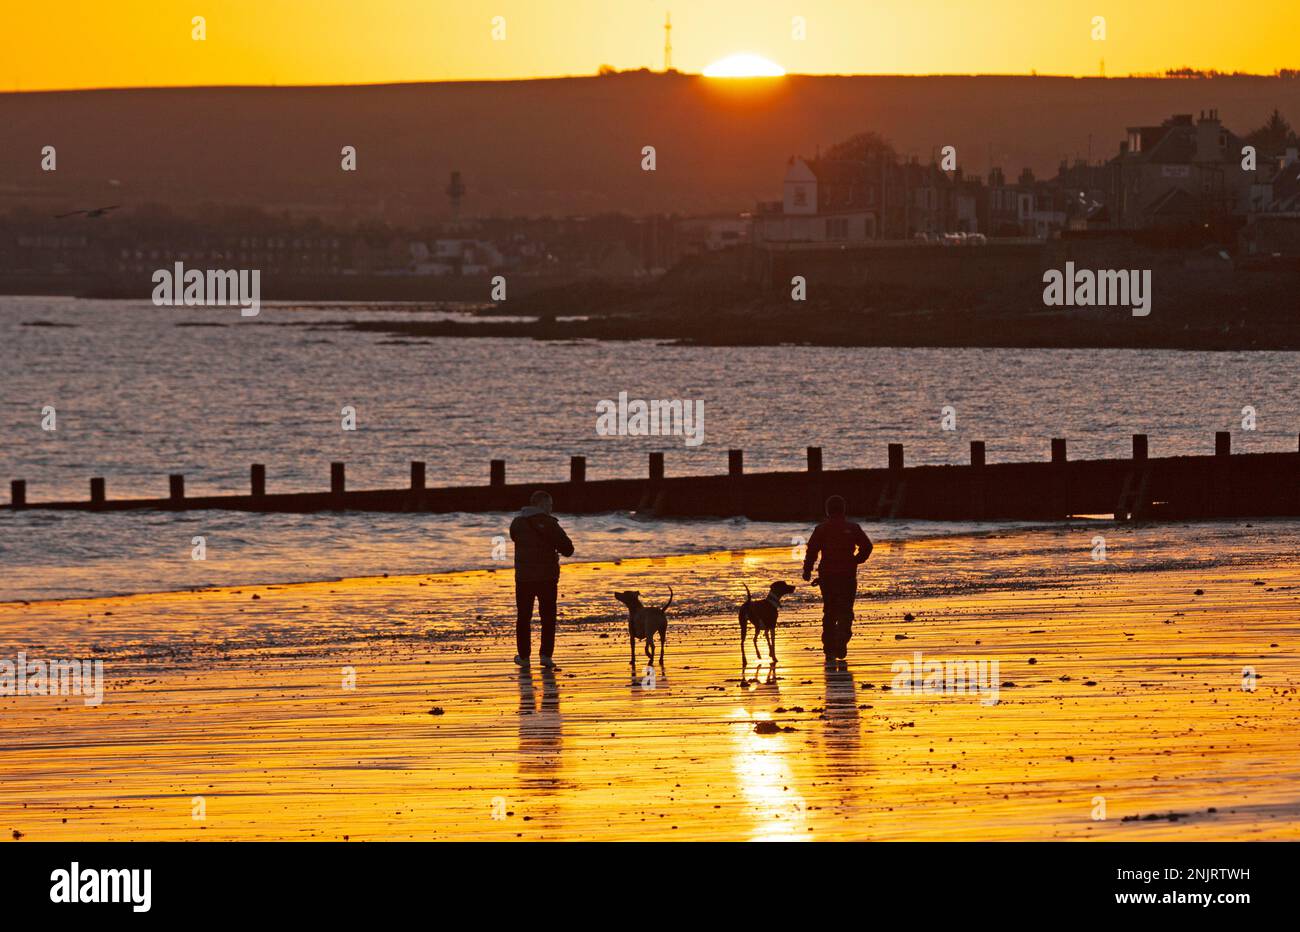 Portobello, Edinburgh, Scotland, UK. 23rd February 2023. Dawn snaps for these two dog walkers at the seaside by the Firth of Forth, taking pictures of their two canine companions. Nippy temperature of minus 2 degrees centigrade. Credit: Archwhite/alamy live news. Stock Photo